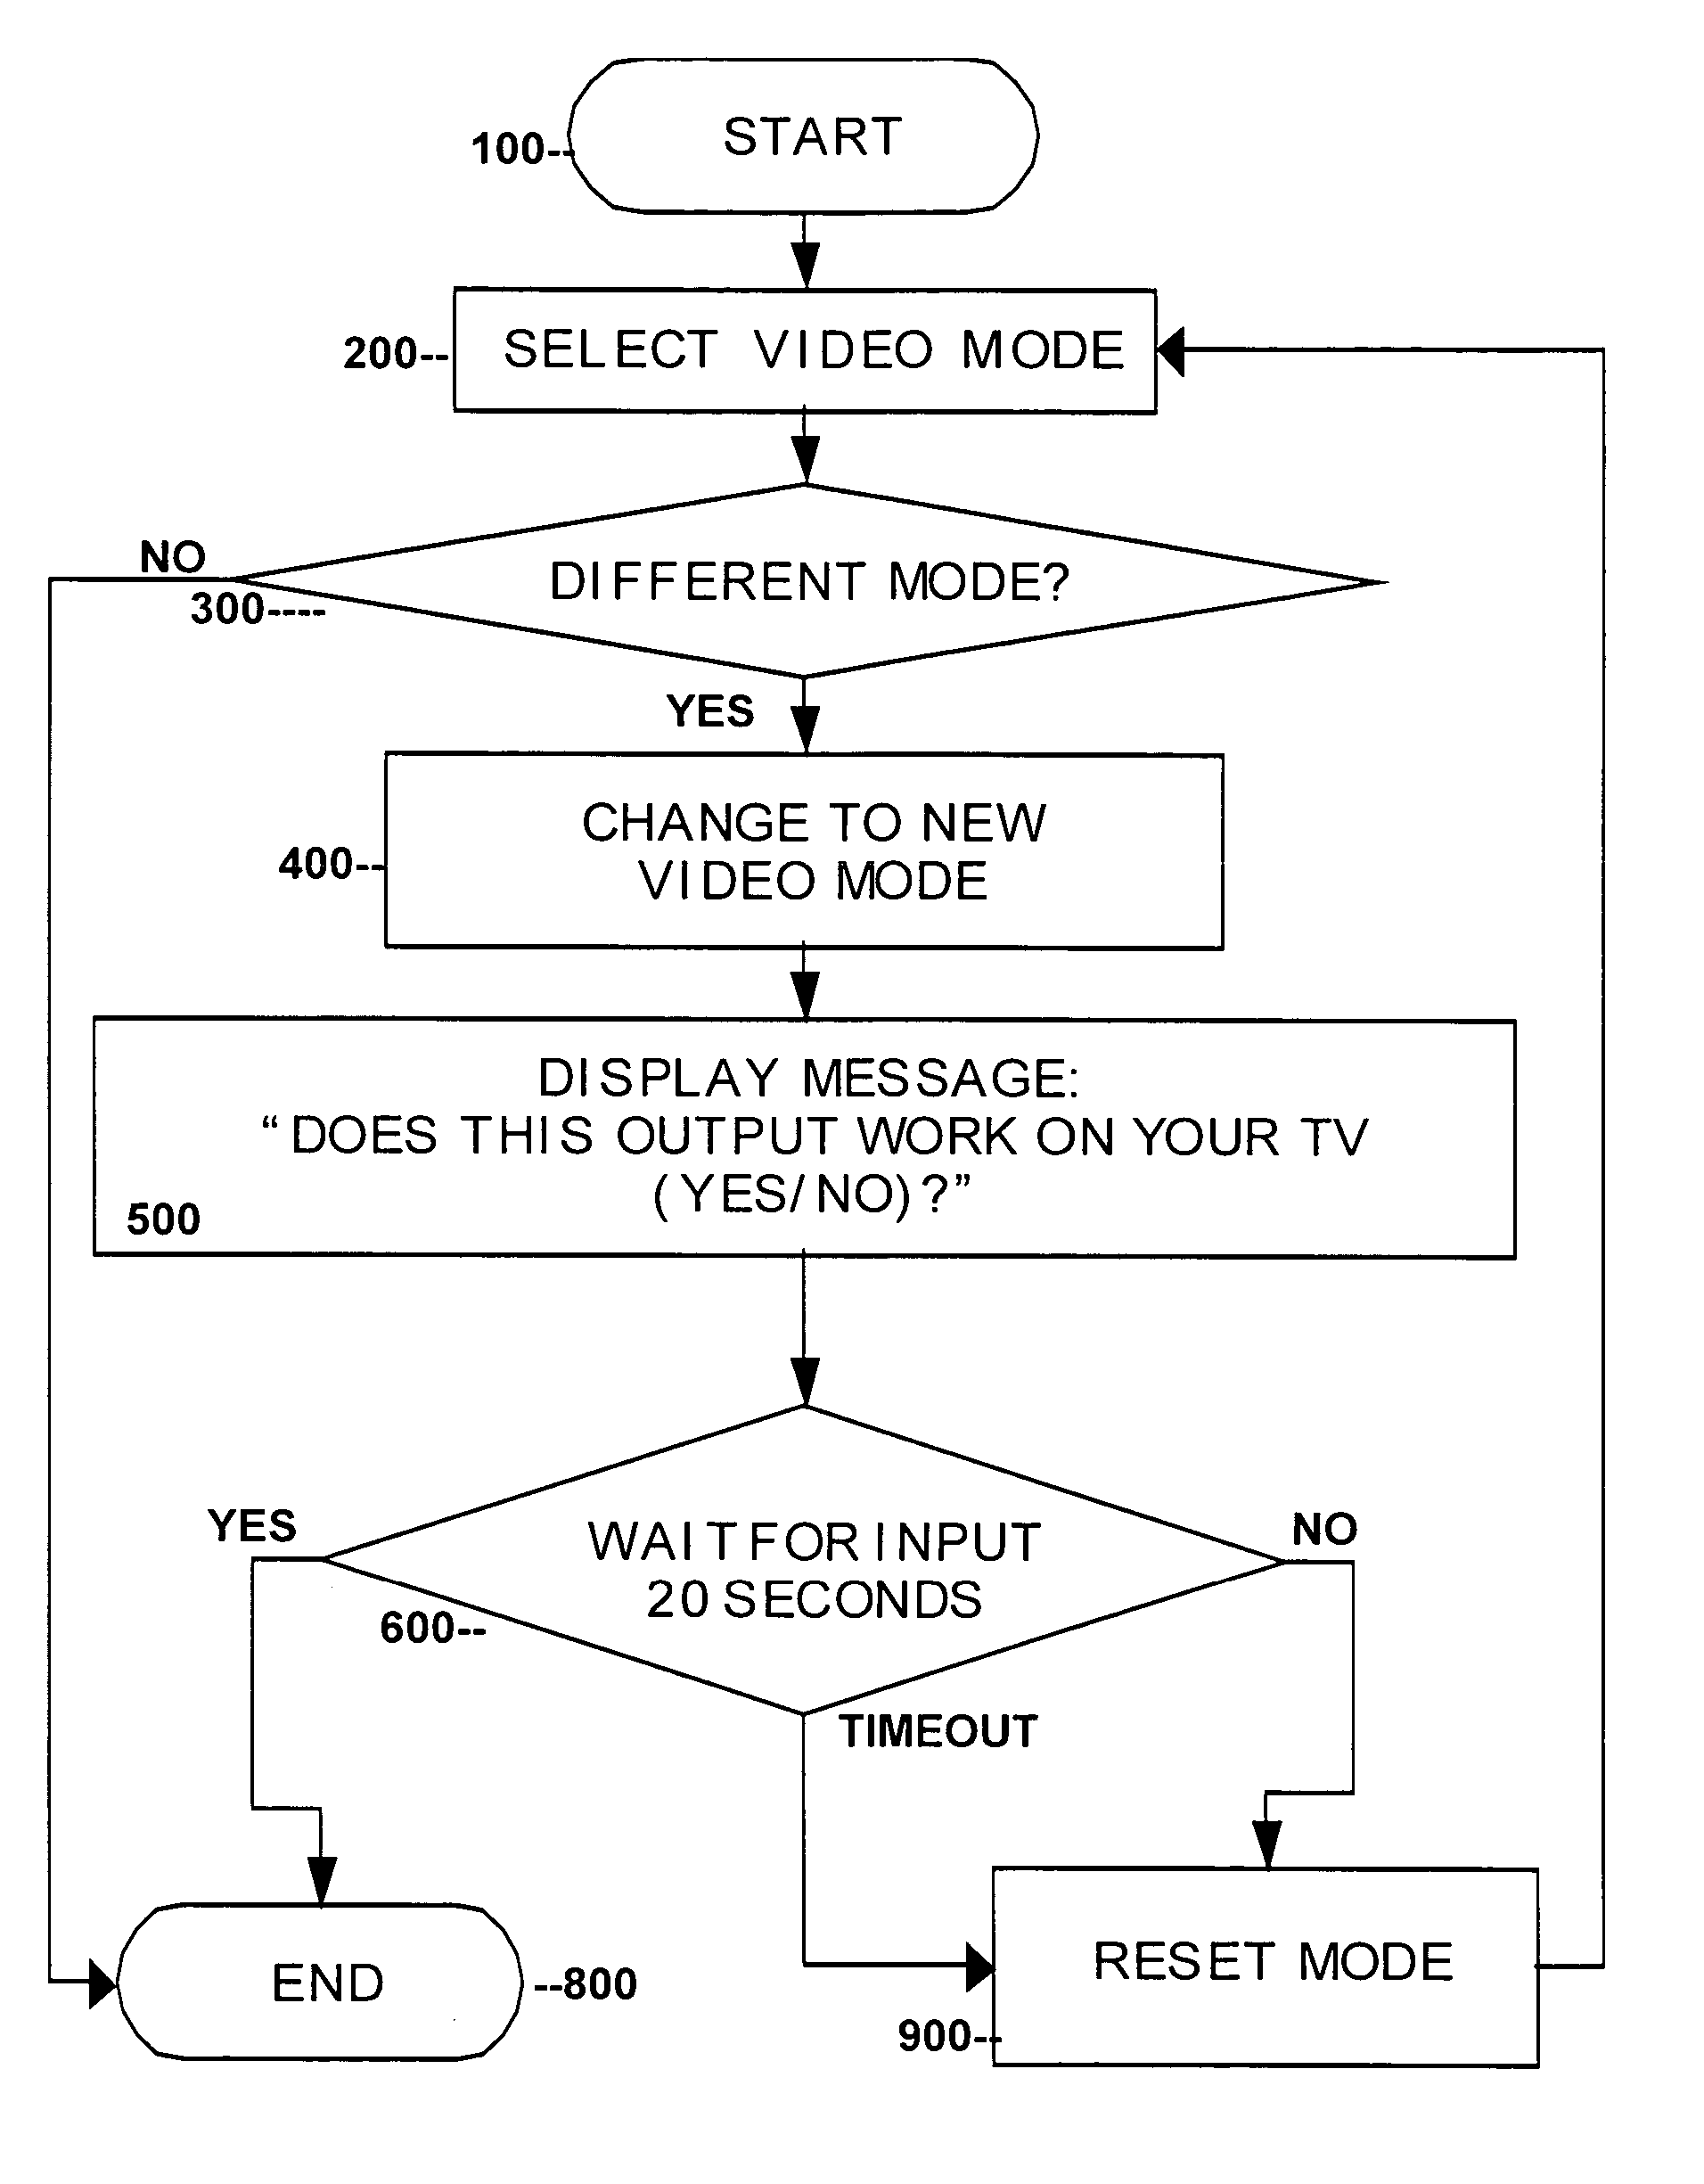 Method and system for switching between video modes in consumer electronics